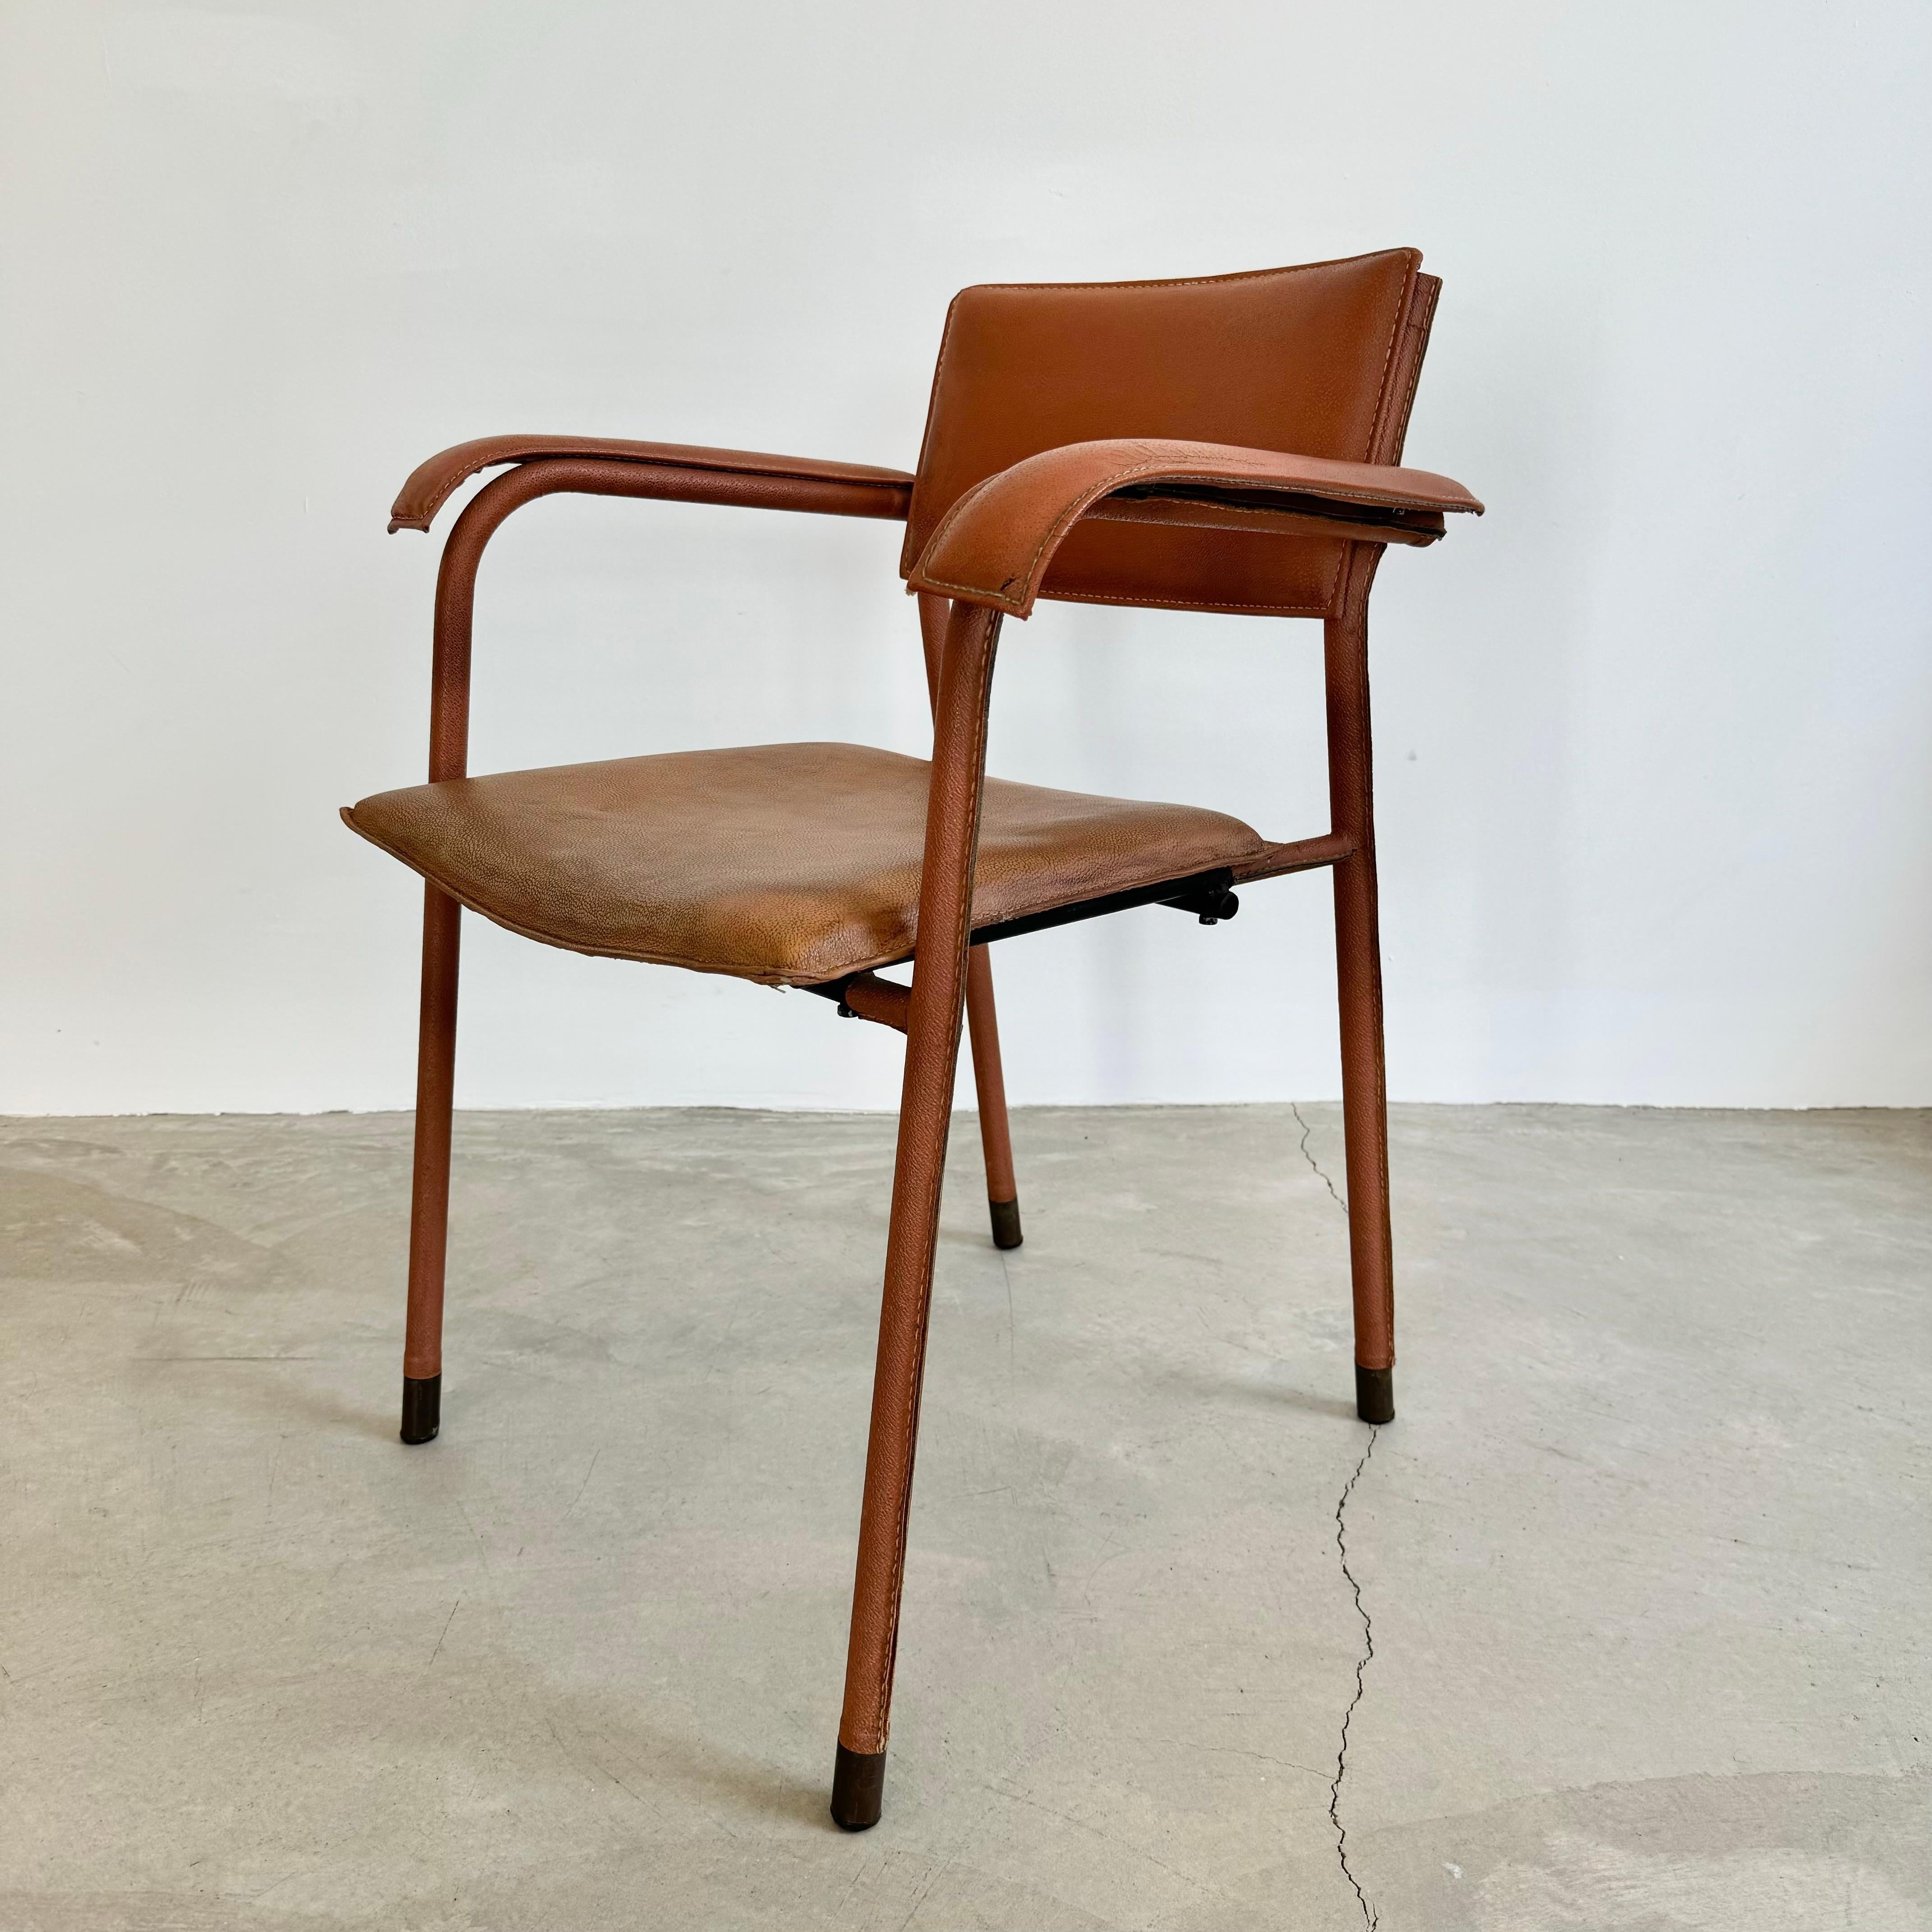 Jacques Adnet Leather Armchair, 1950s France For Sale 2